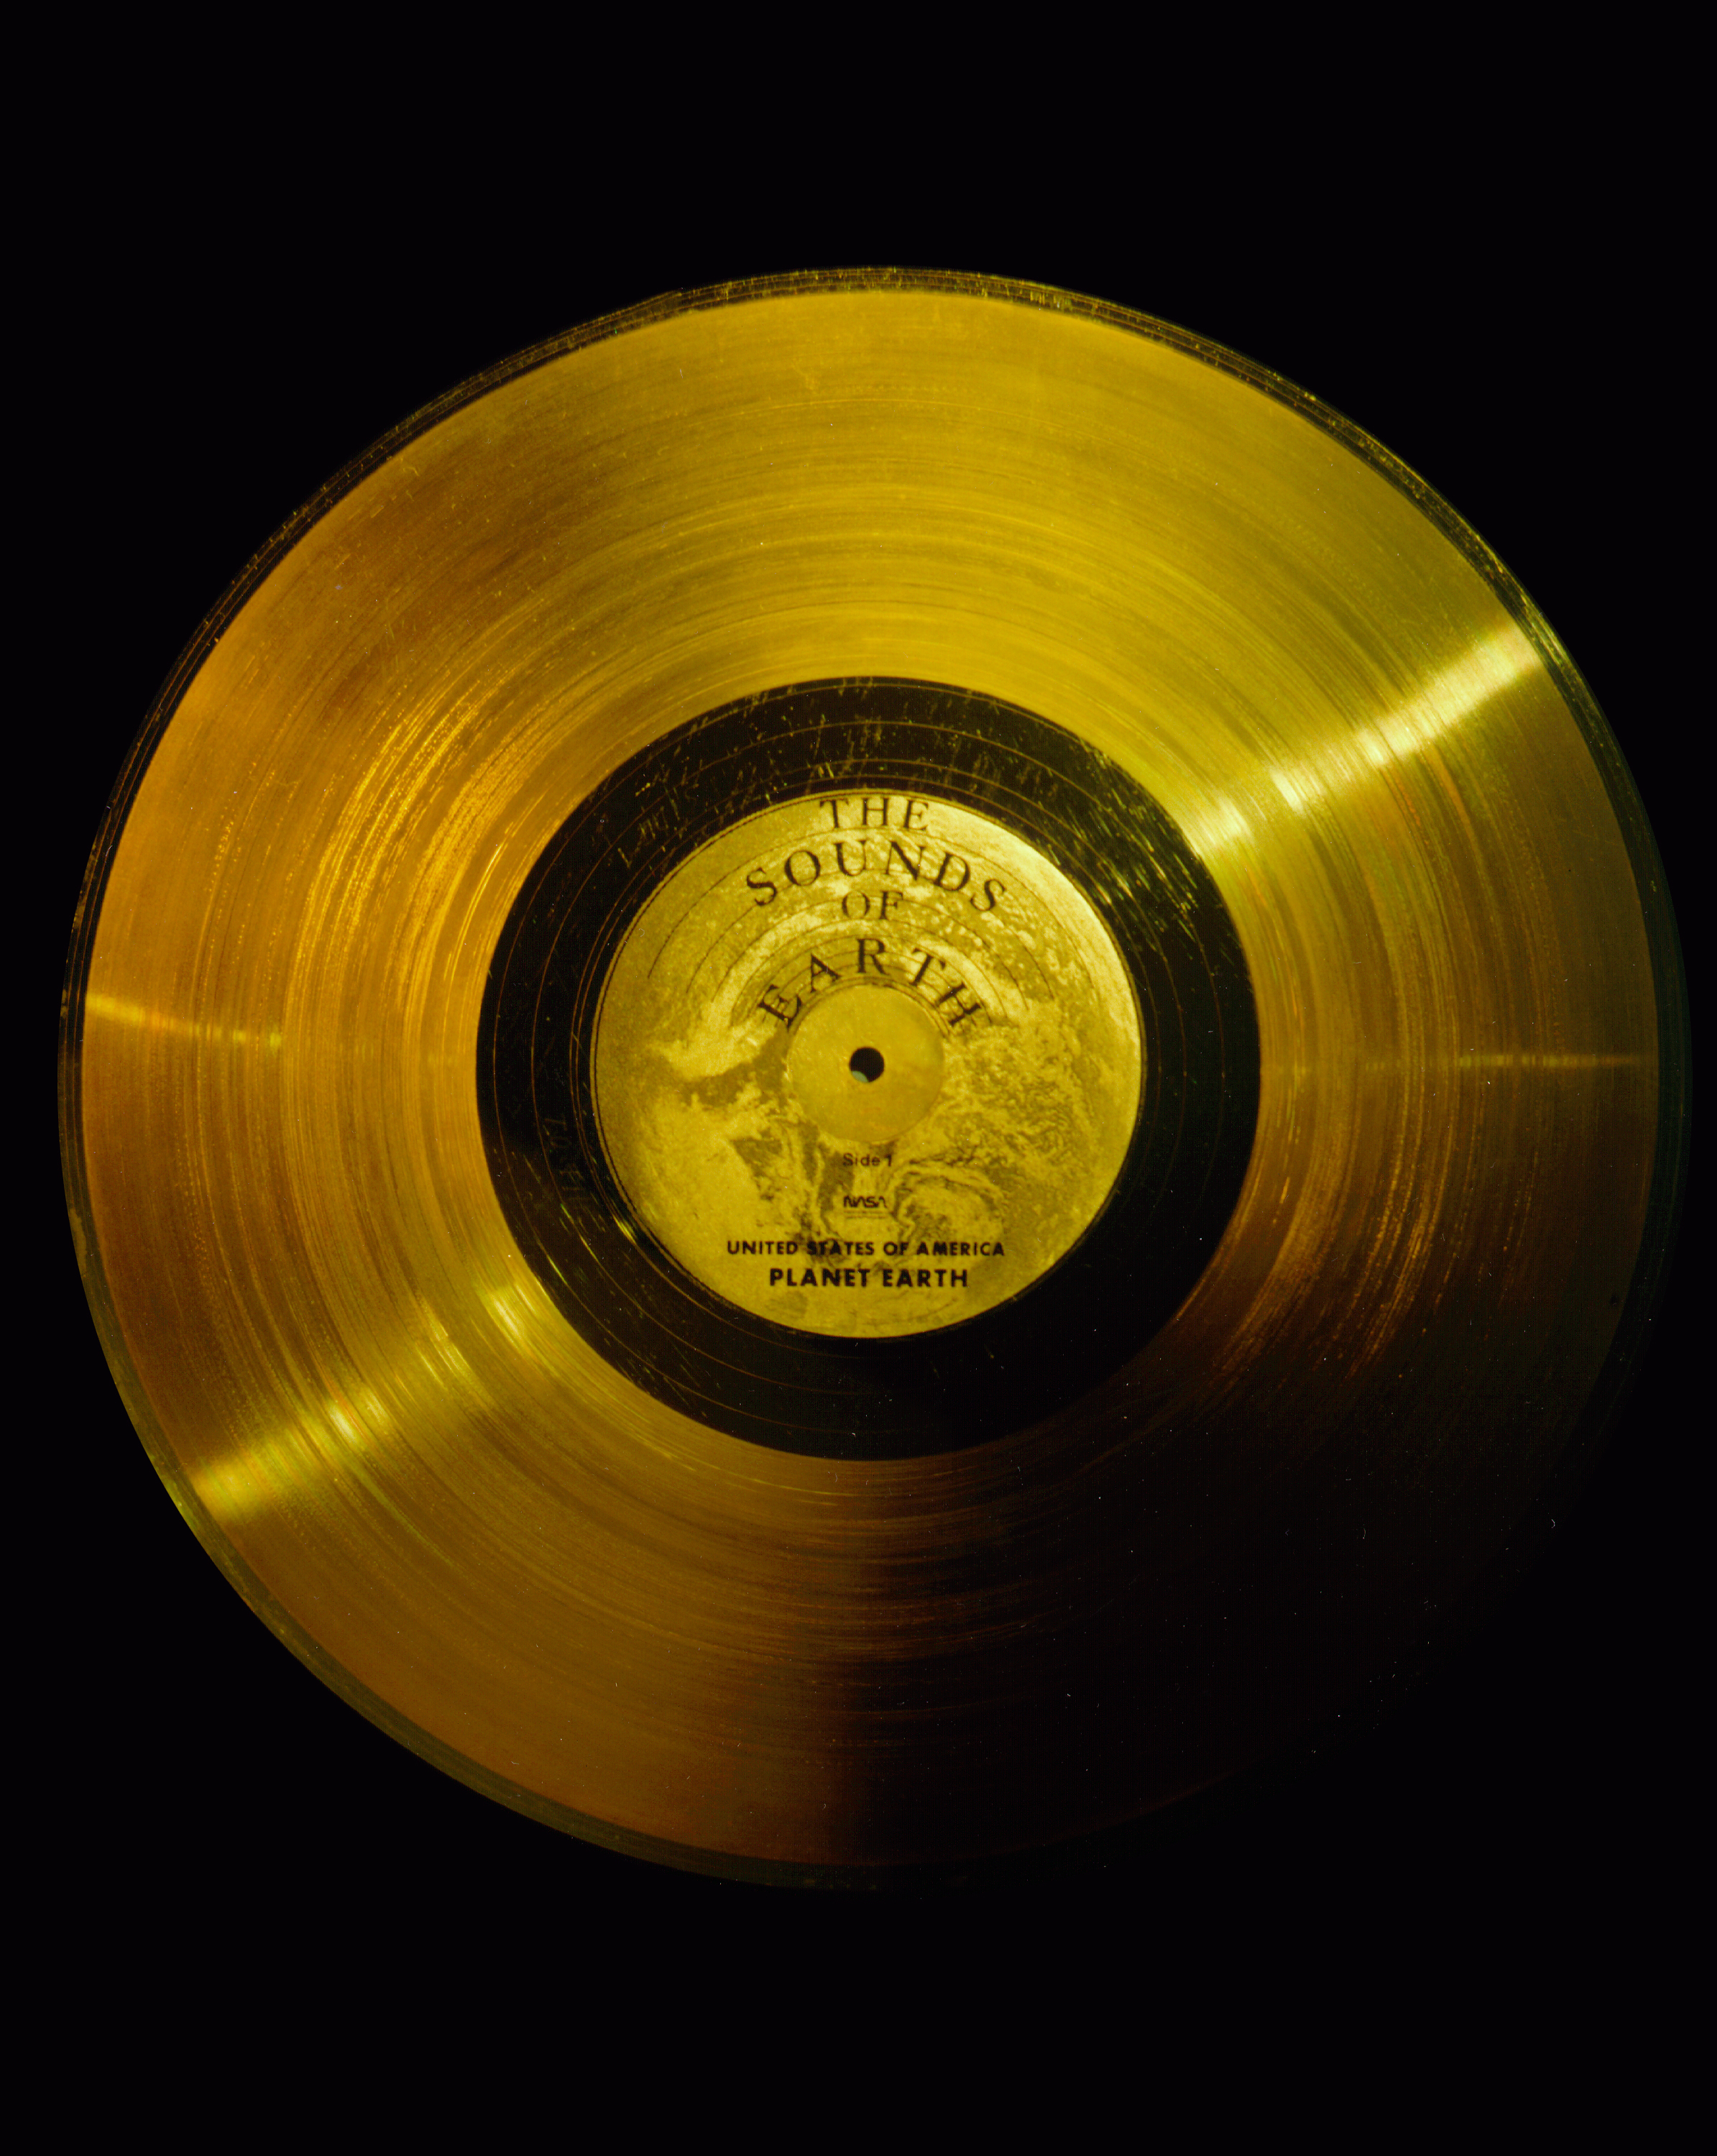 songs on voyager 1 golden record